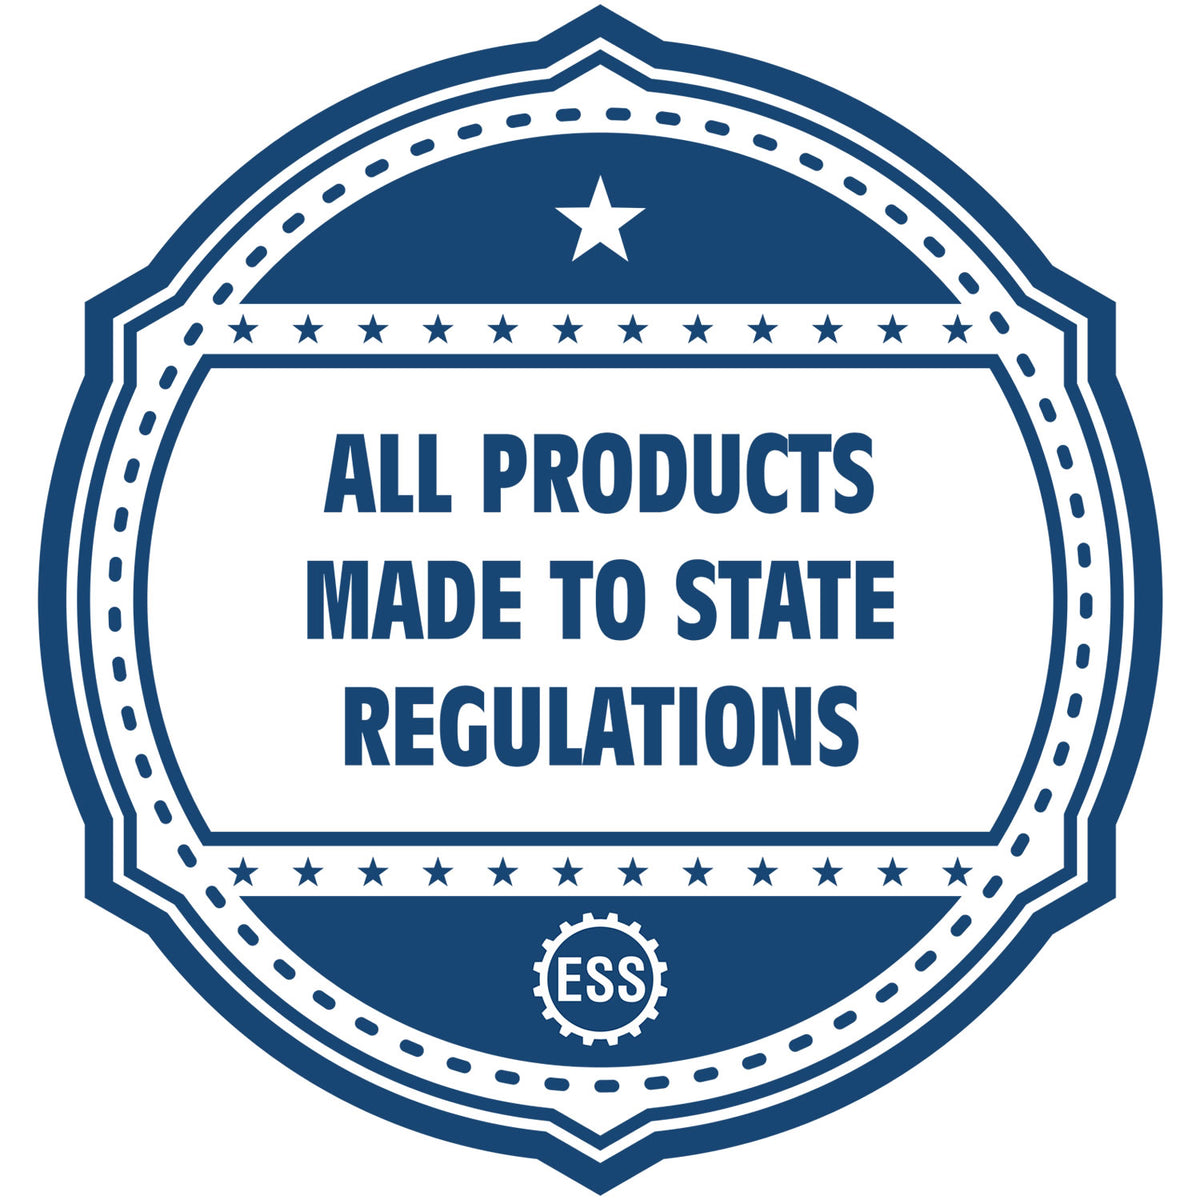 An icon or badge element for the Self-Inking State Seal Nebraska Notary Stamp showing that this product is made in compliance with state regulations.